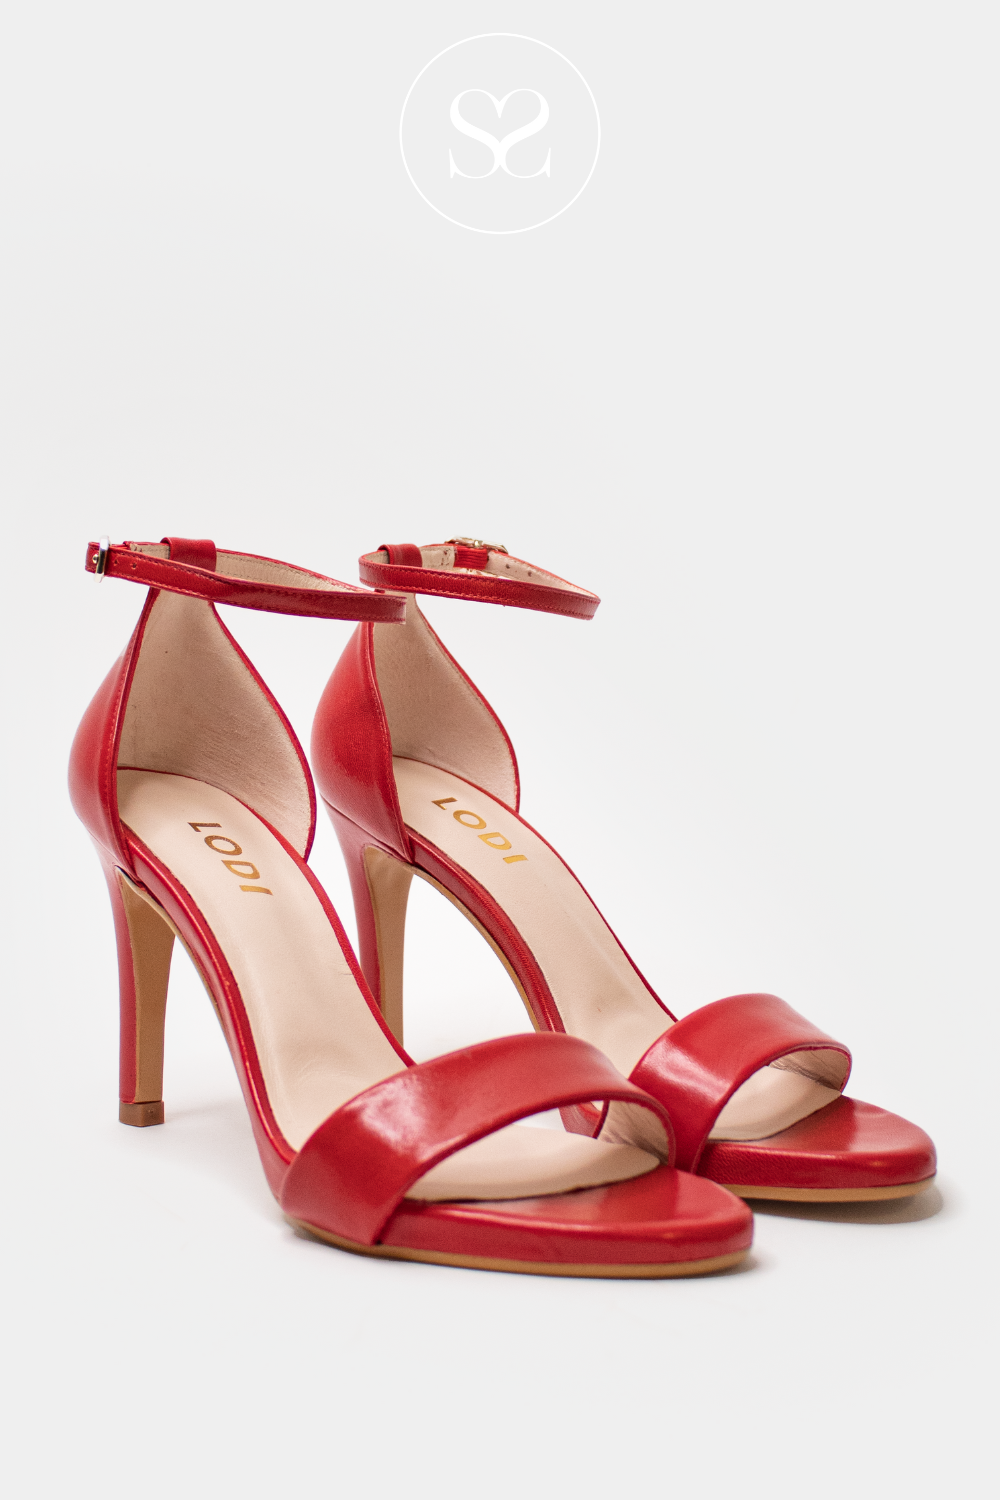 BARELY THERE SANDALS FROM LODI IN RED LEATHER